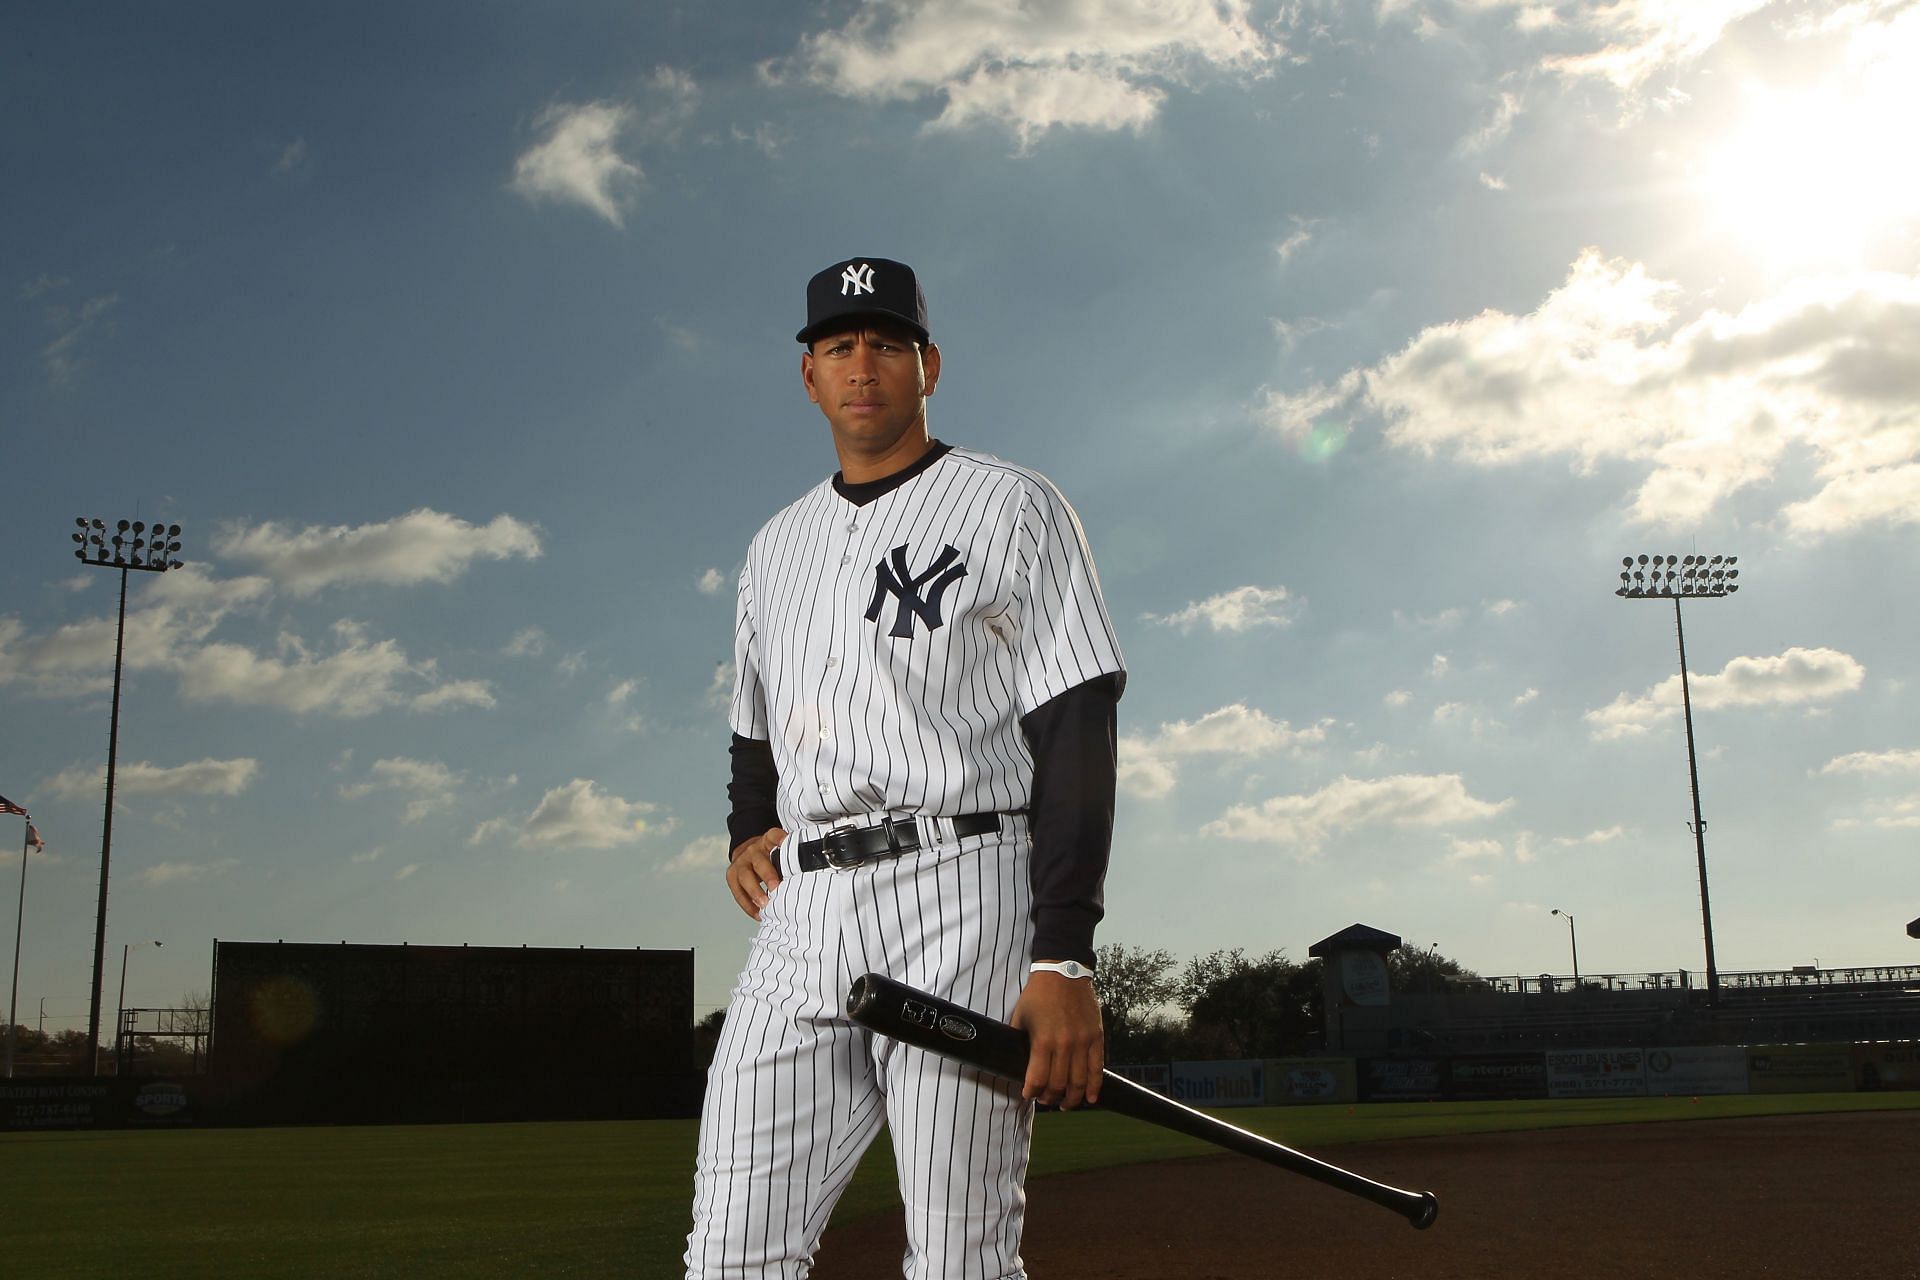 New York Yankees Photo Day: TAMPA, FL - FEBRUARY 25: Alex Rodriguez #13 of the New York Yankees poses for a photo during Spring Training Media Photo Day at George M. Steinbrenner Field on February 25, 2010, in Tampa, Florida. (Photo by Nick Laham/Getty Images)